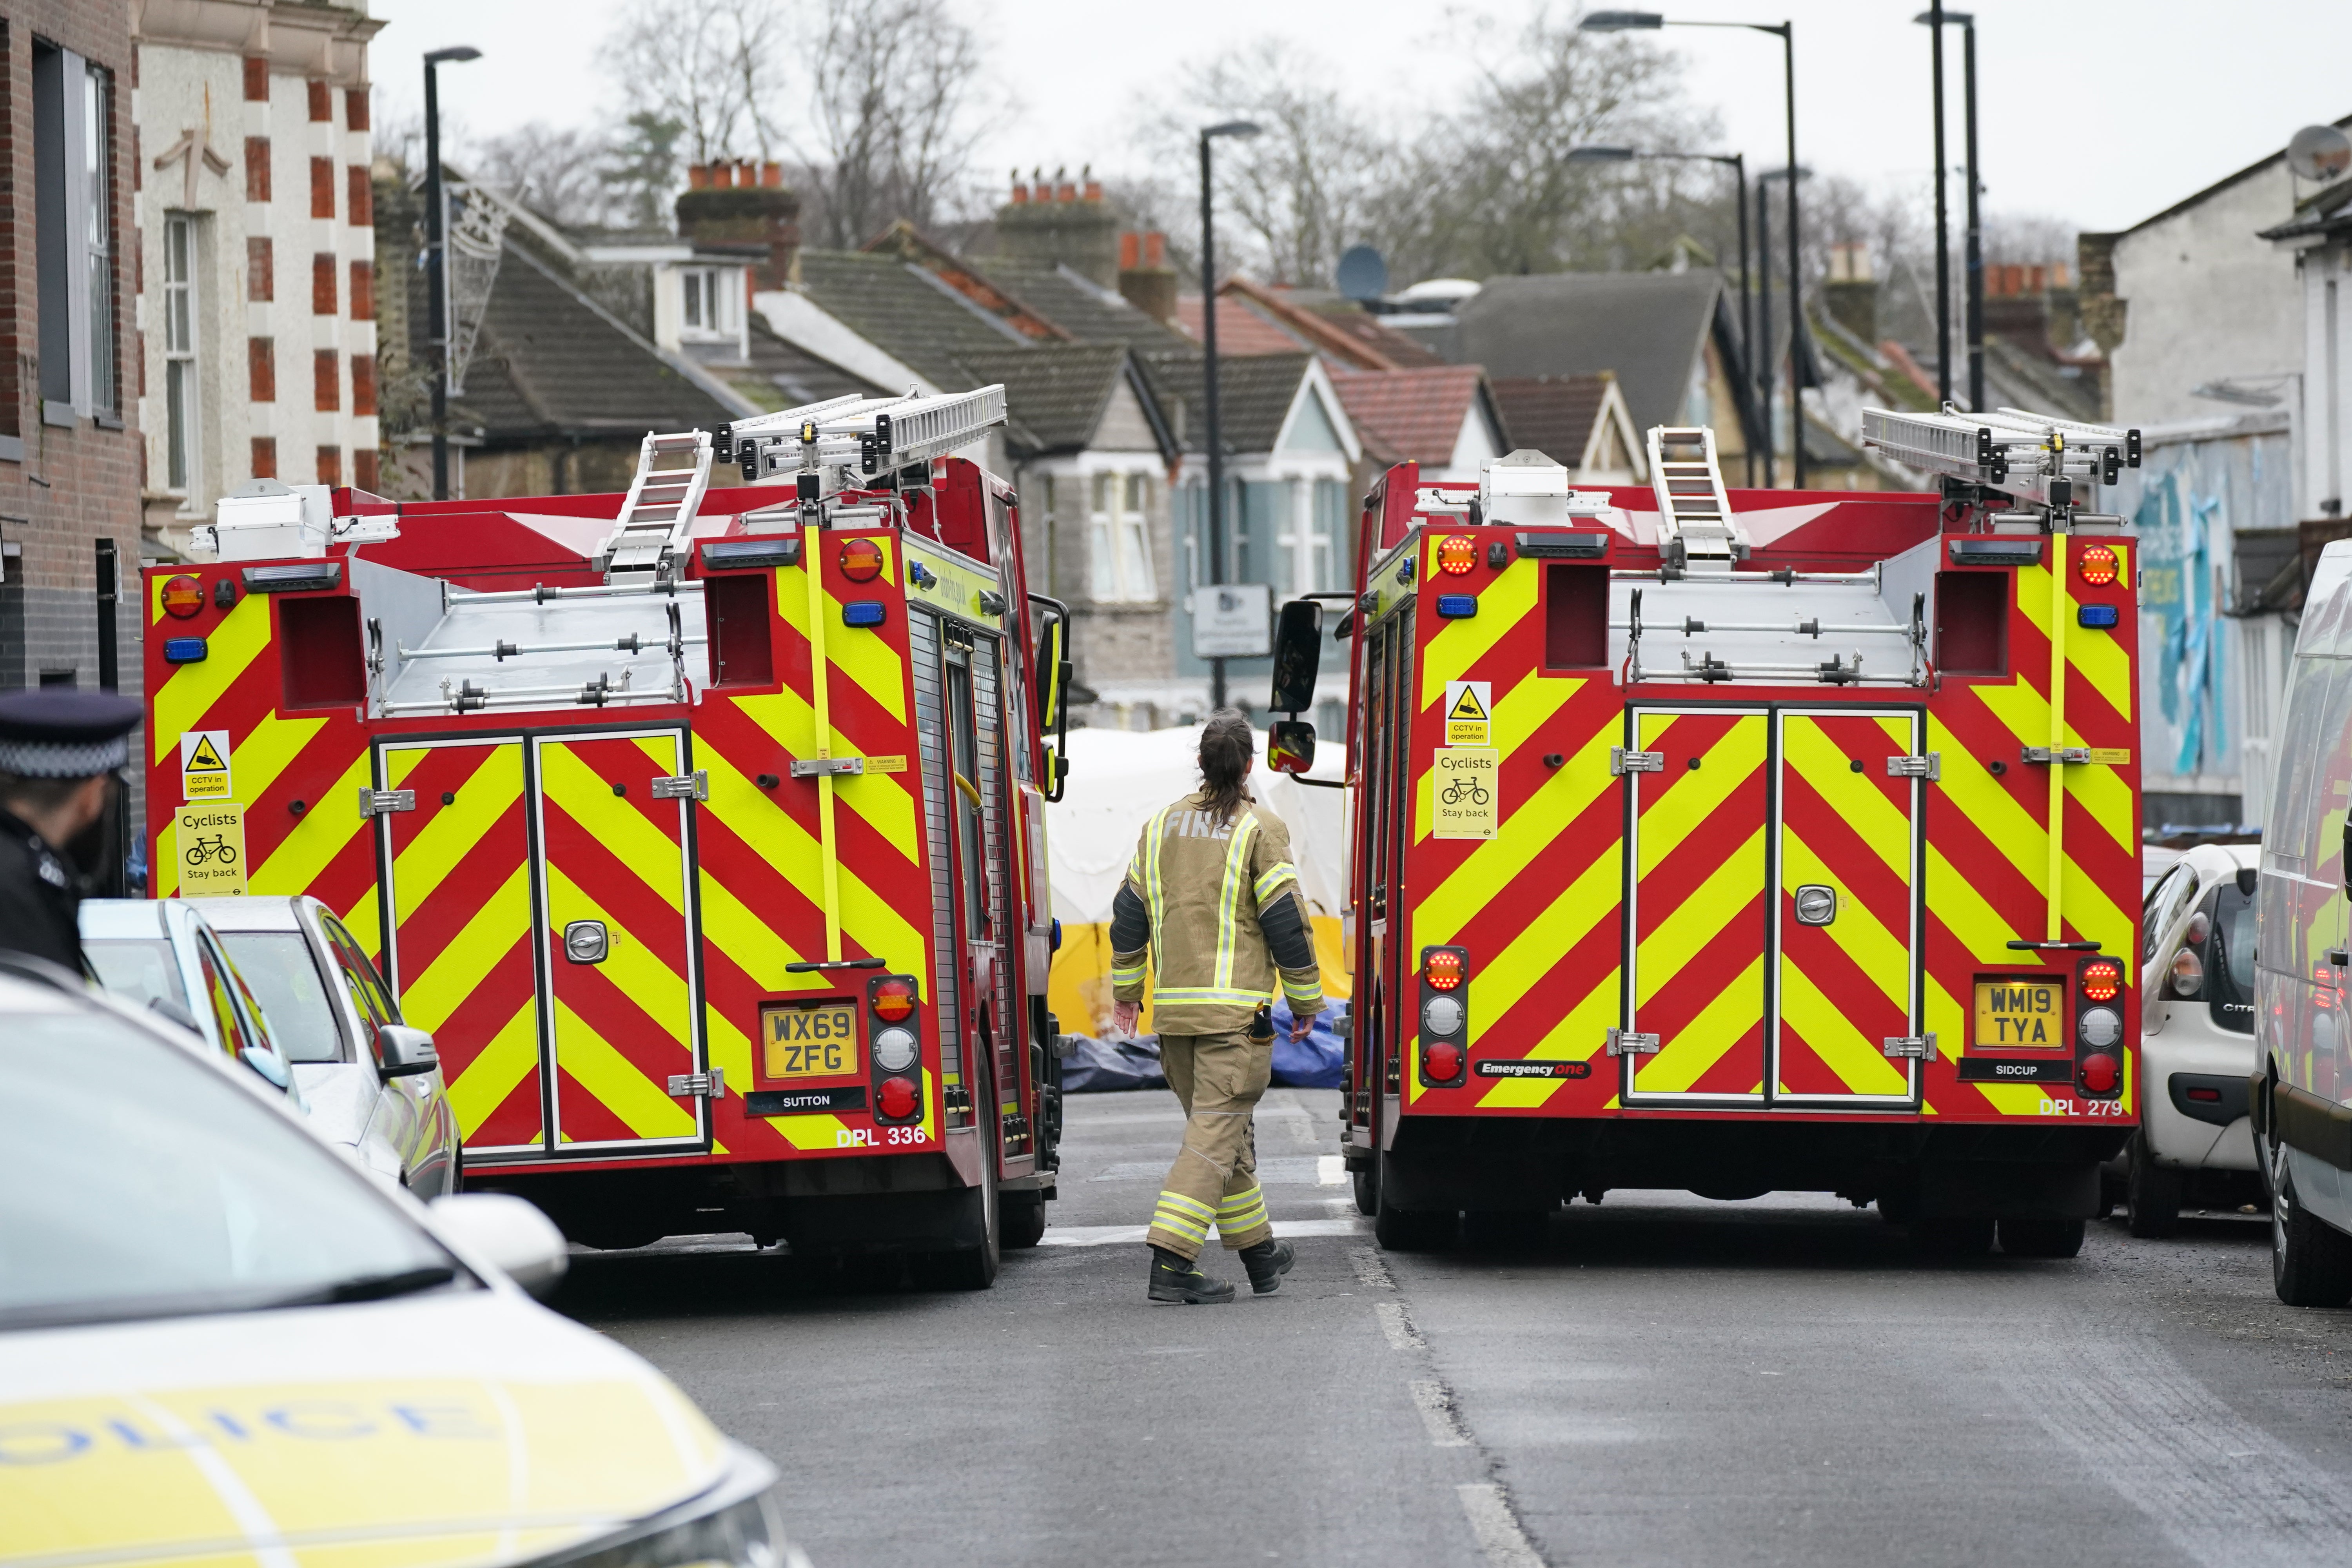 Two men were killed after a fire broke out at a property in Croydon